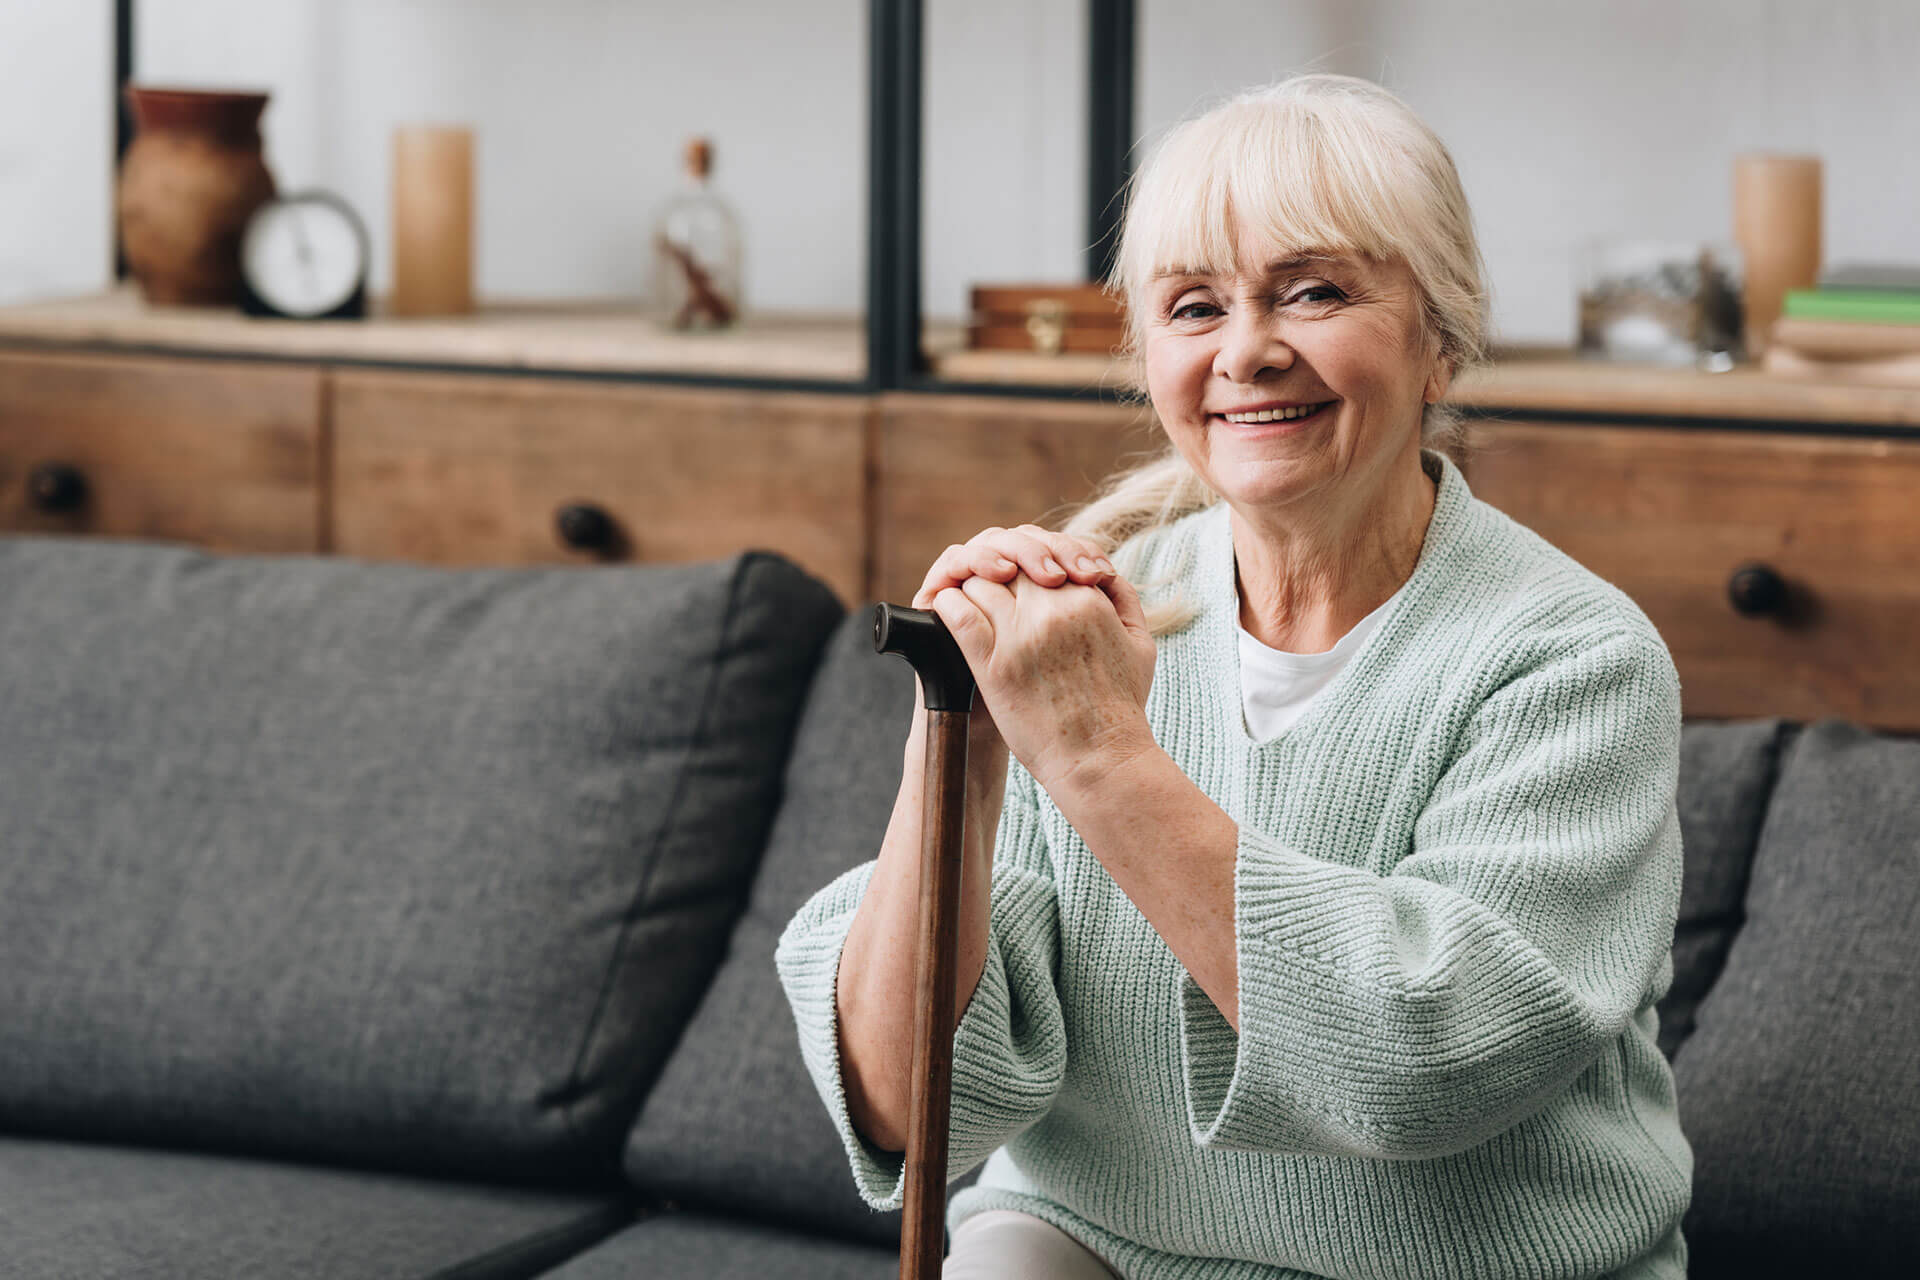 Elderly woman smiling while sitting on a sofa with her hands on a walking cane